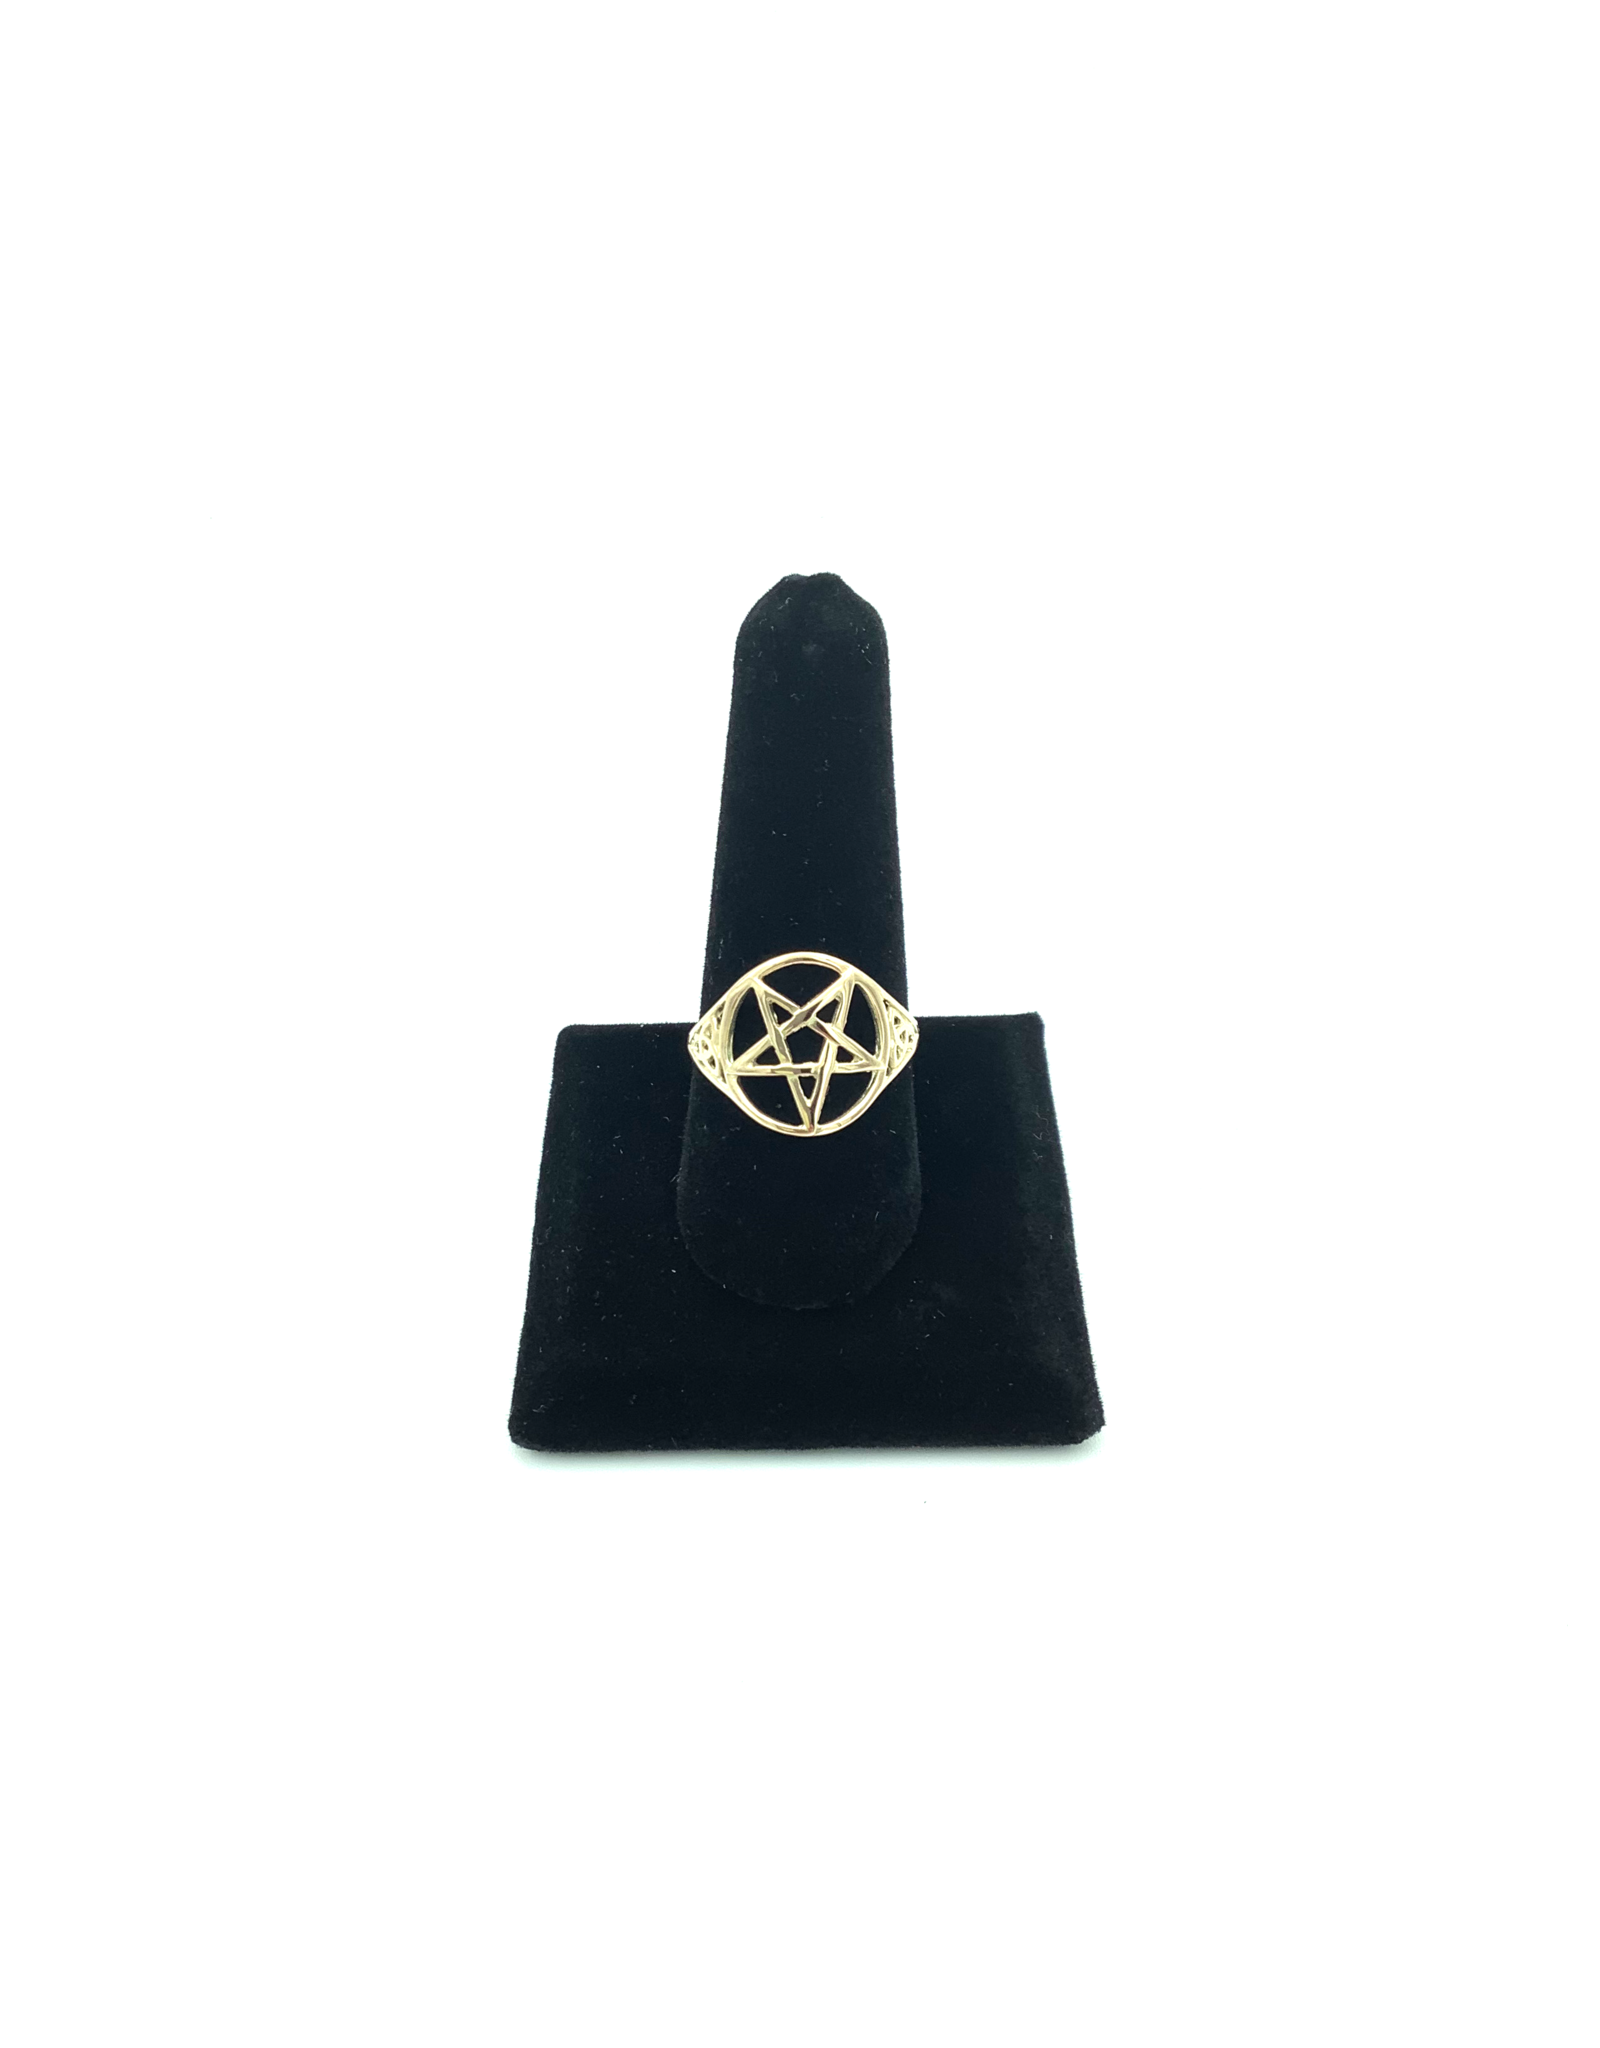 Pentacle Triquetra Ring in 14K Yellow Gold